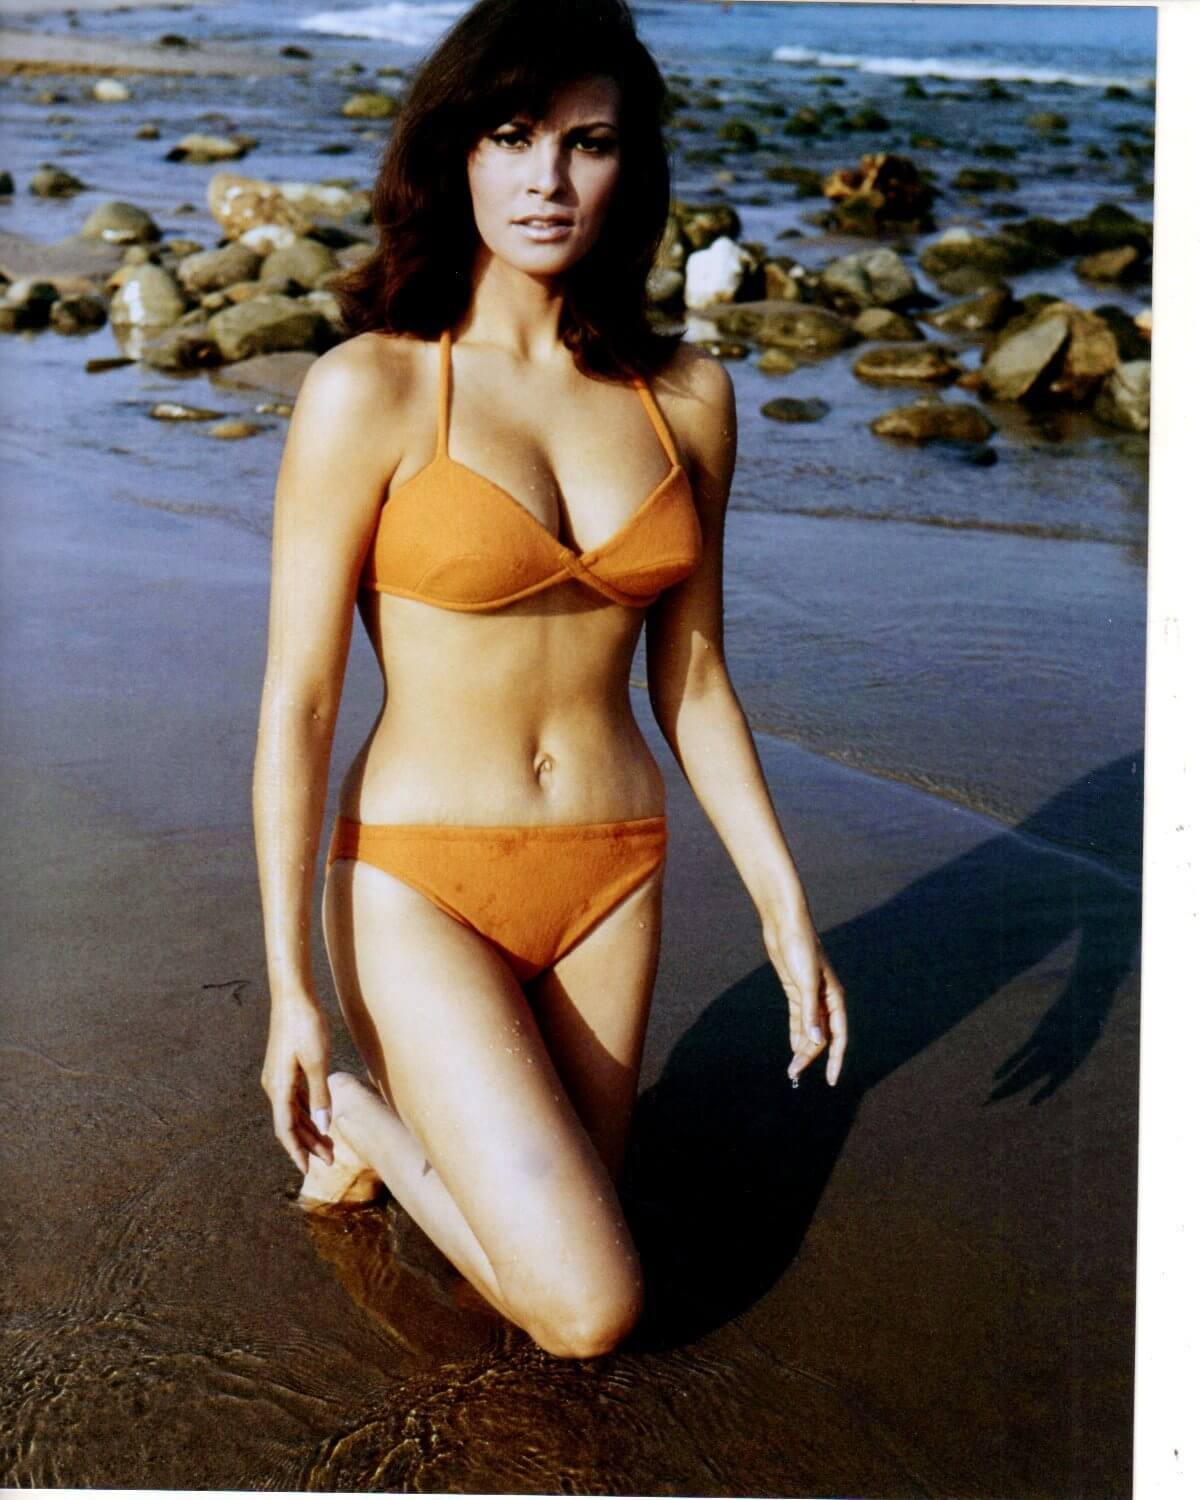 49 Hottest Raquel Welch Big Butt Pictures Will Make You Drool For Her | Best Of Comic Books